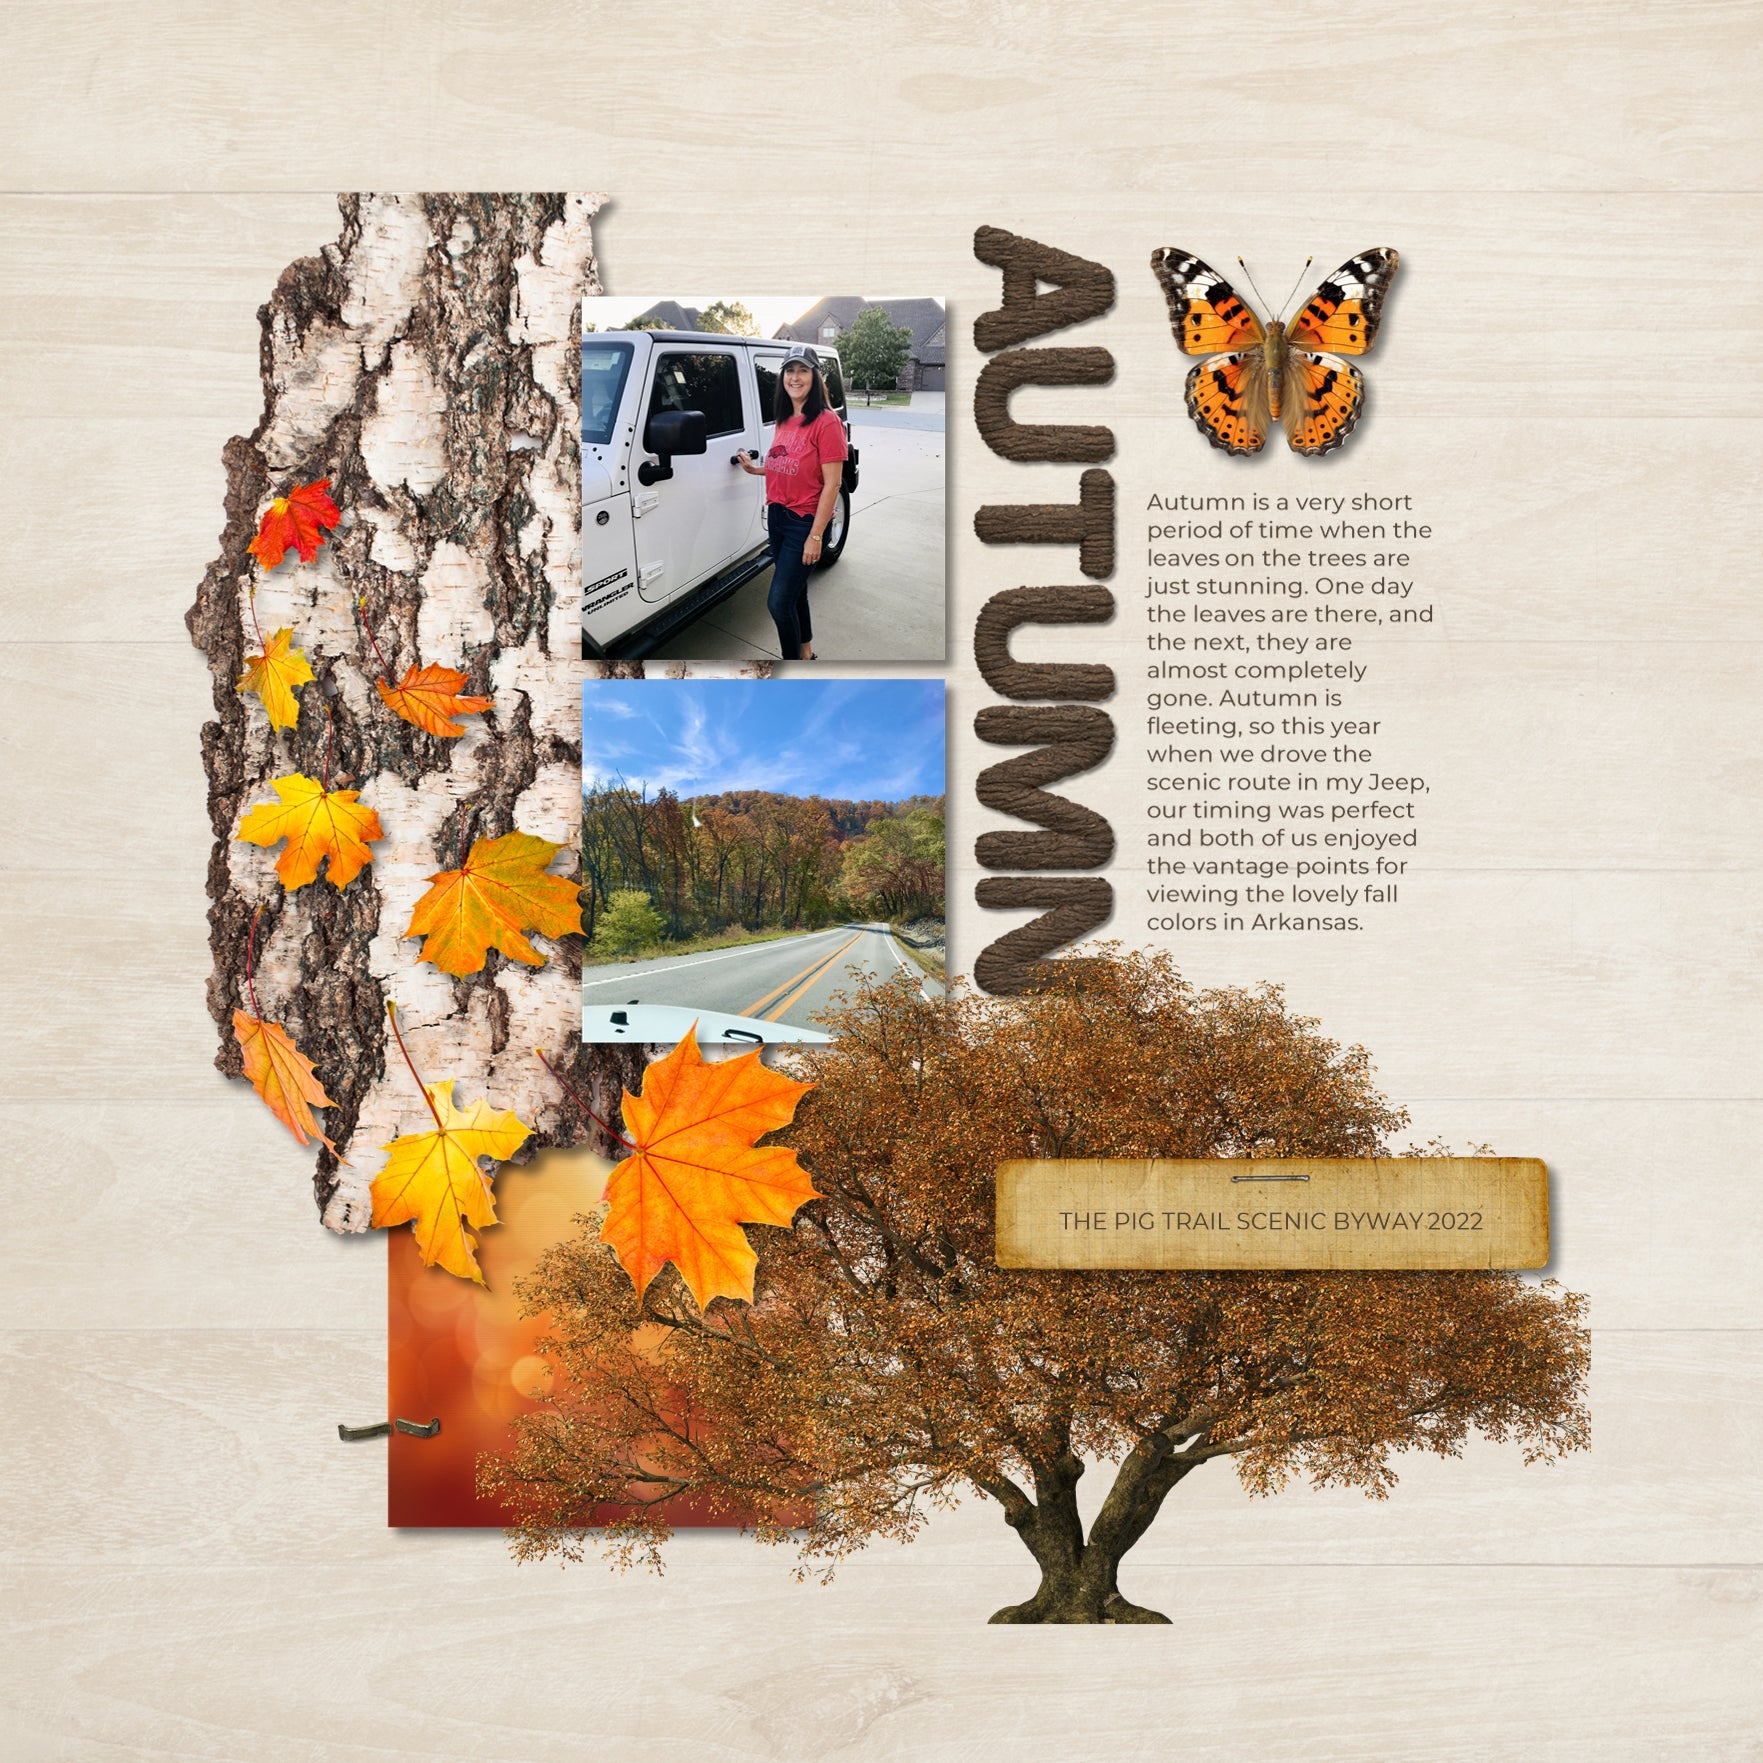 Fall is in the air and this wood bark digital alpha set by Lucky Girl Creative will help you add those special touches to your project titles all season long. Great for autumn, outdoor, nature, cabin, tree, and forest pages. The Autumn Flora & Fauna Alpha Set consists of a full set of digital art uppercase letters, numbers 0-9, and some punctuation marks. This alpha set is available as individual embellishments only. 